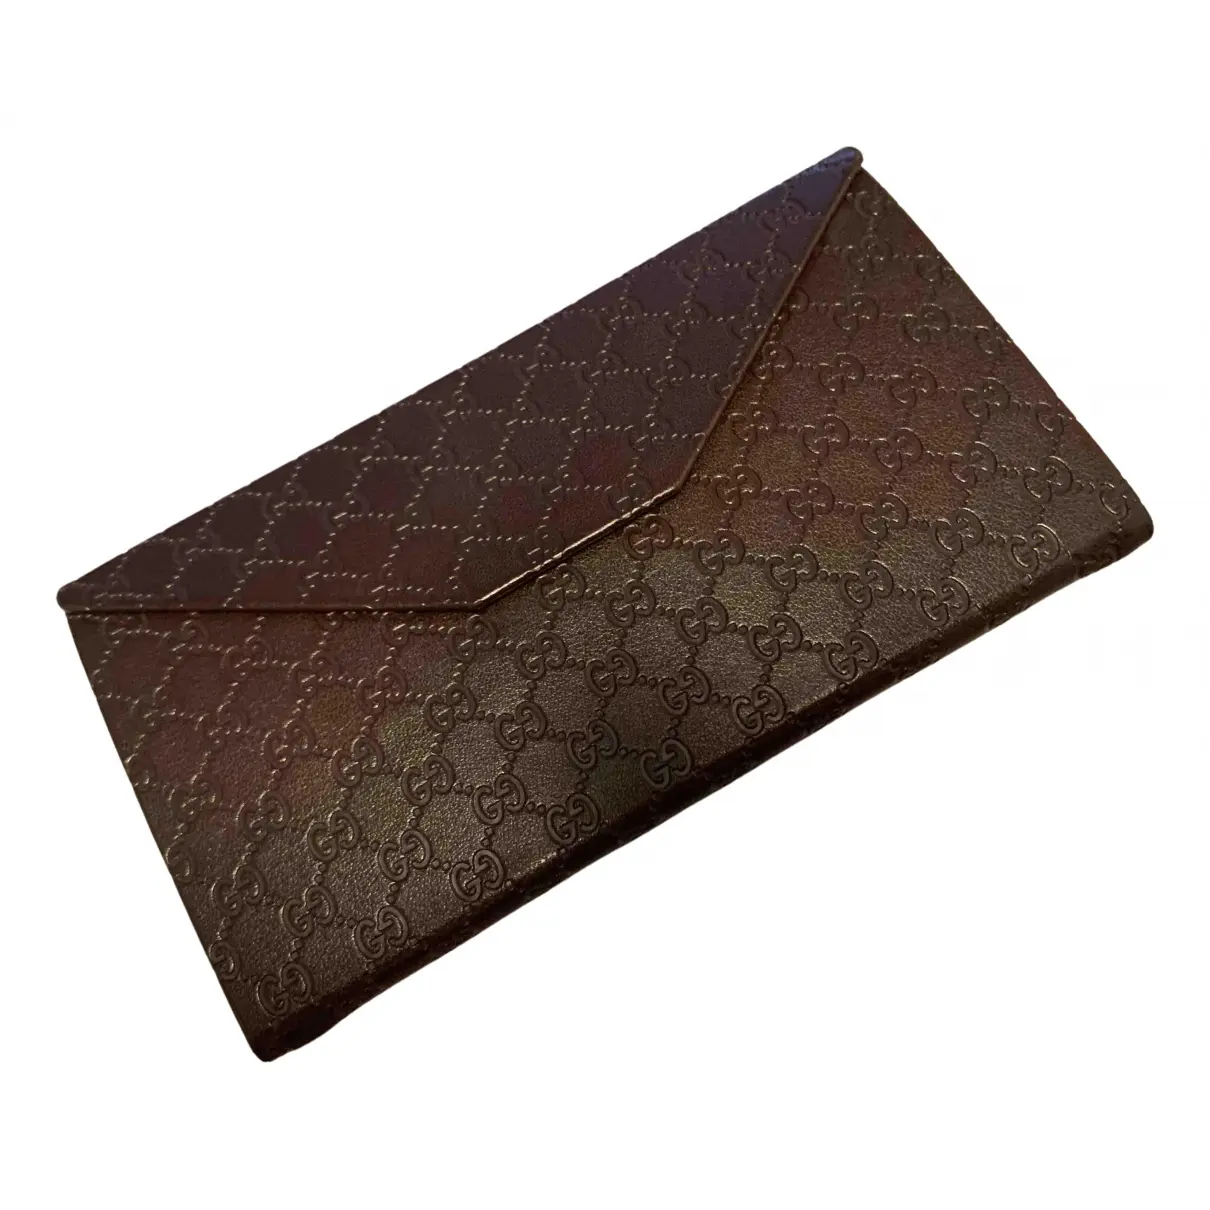 Patent leather wallet Gucci